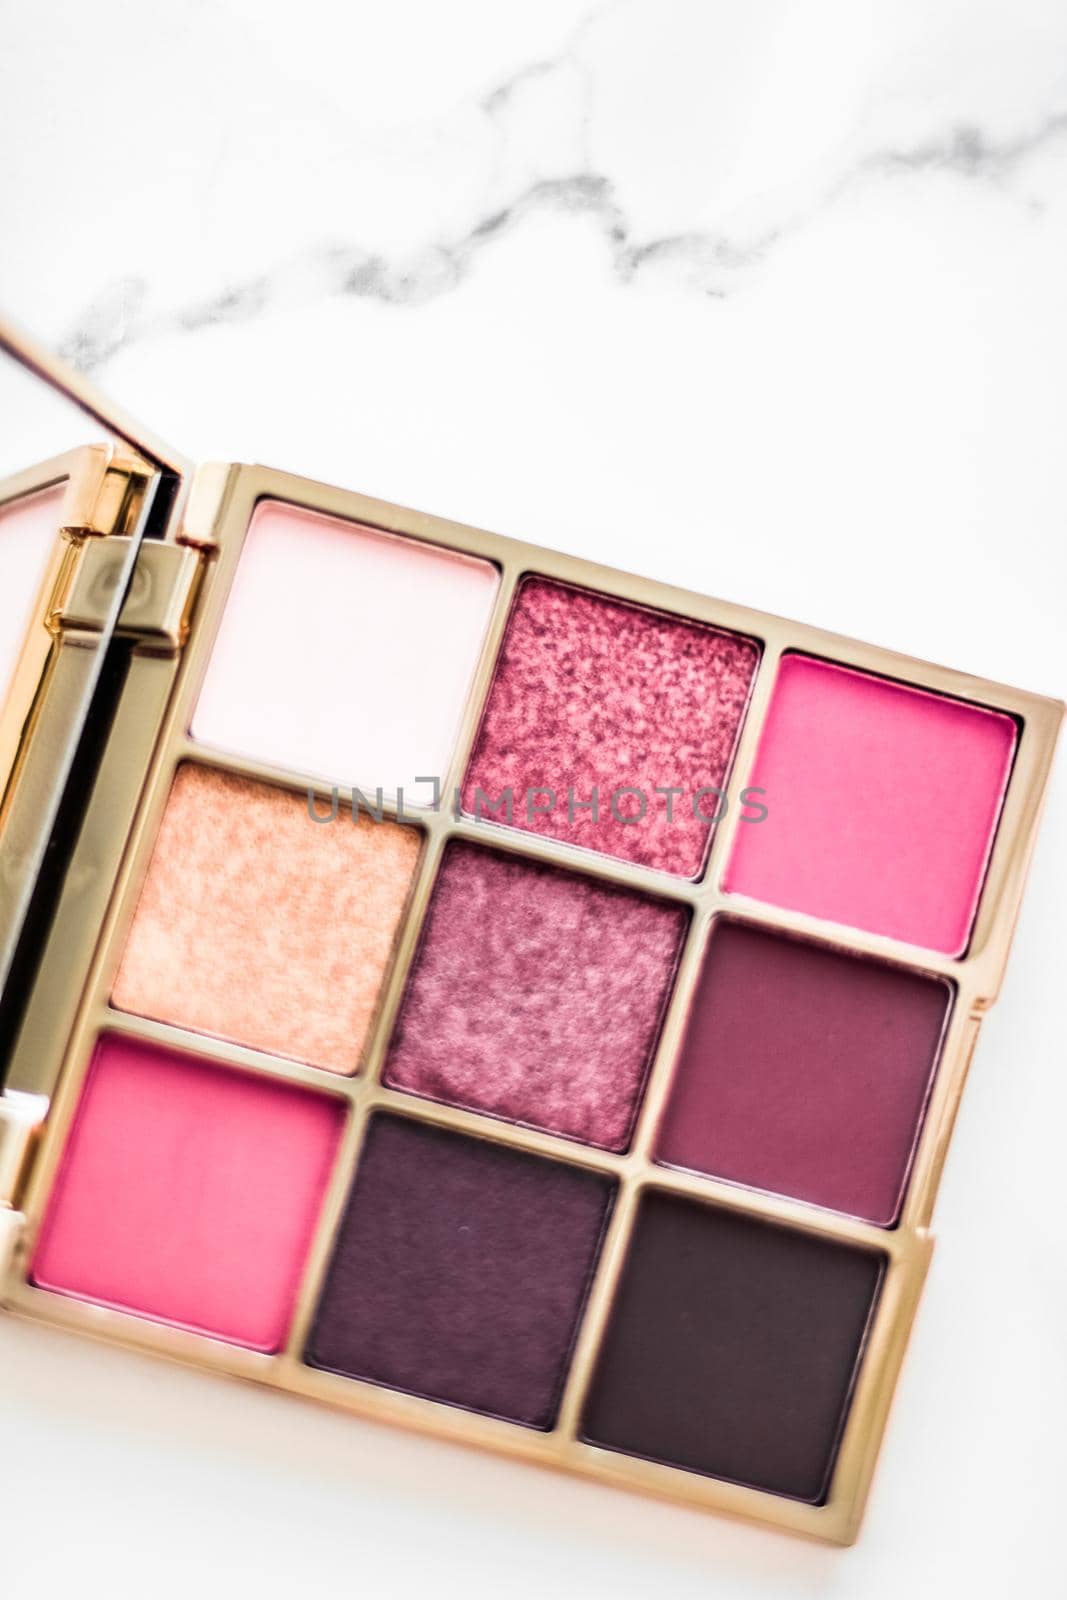 Eye shadow palette on marble background, make-up and cosmetics product for luxury beauty brand sale promotion and holiday flatlay design by Anneleven